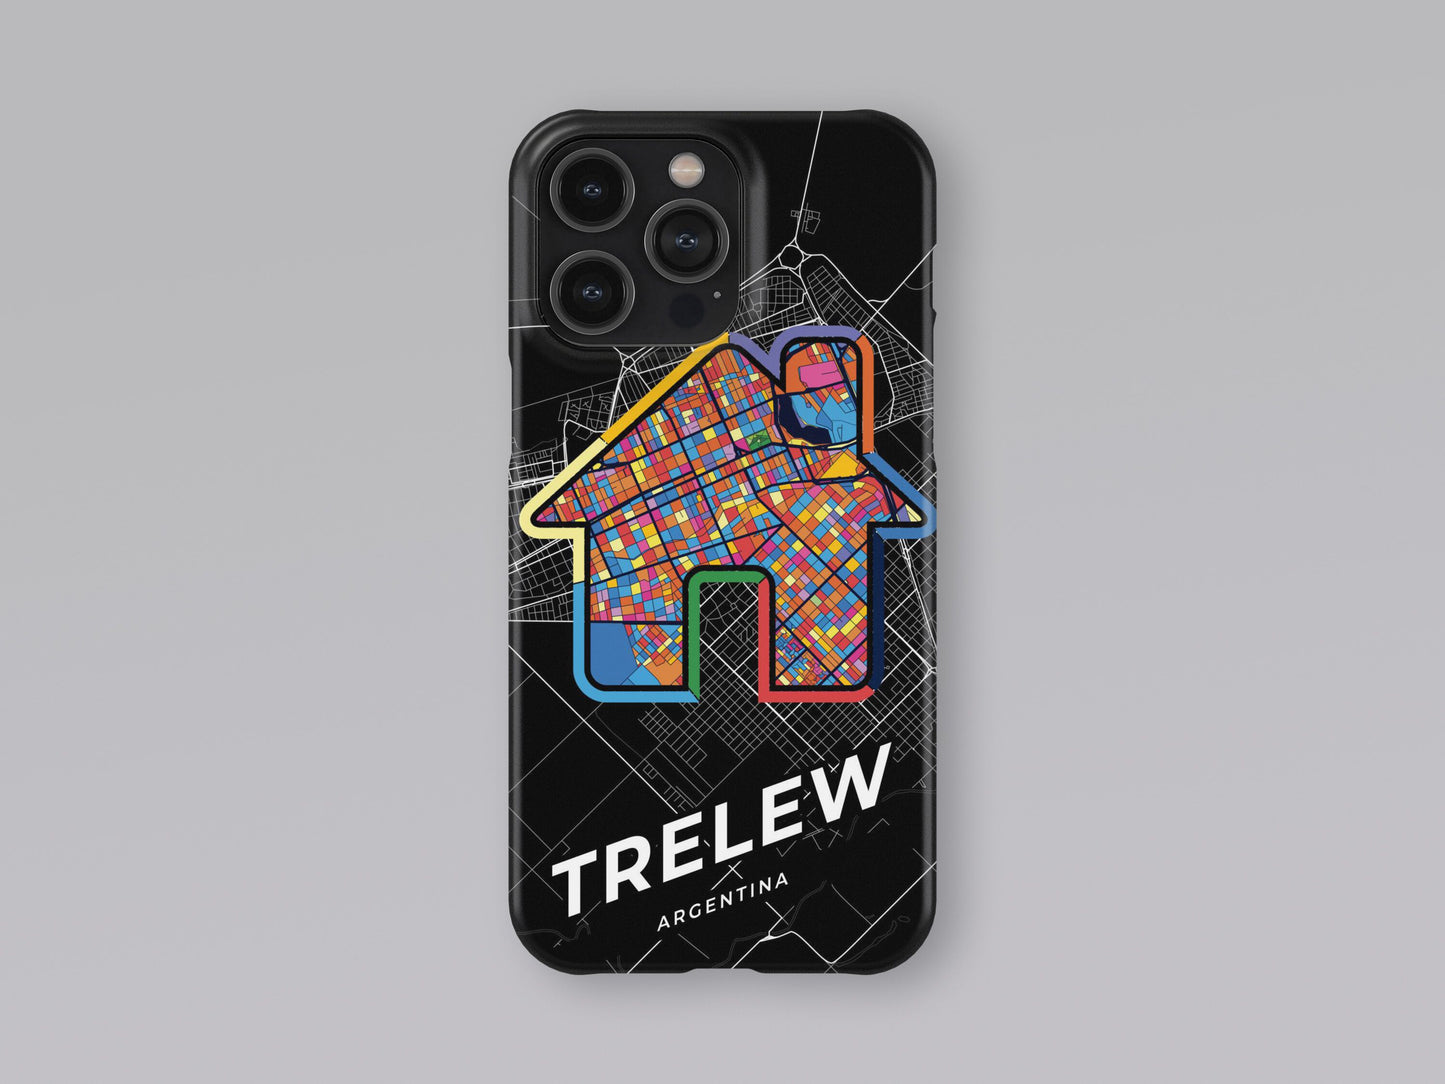 Trelew Argentina slim phone case with colorful icon. Birthday, wedding or housewarming gift. Couple match cases. 3